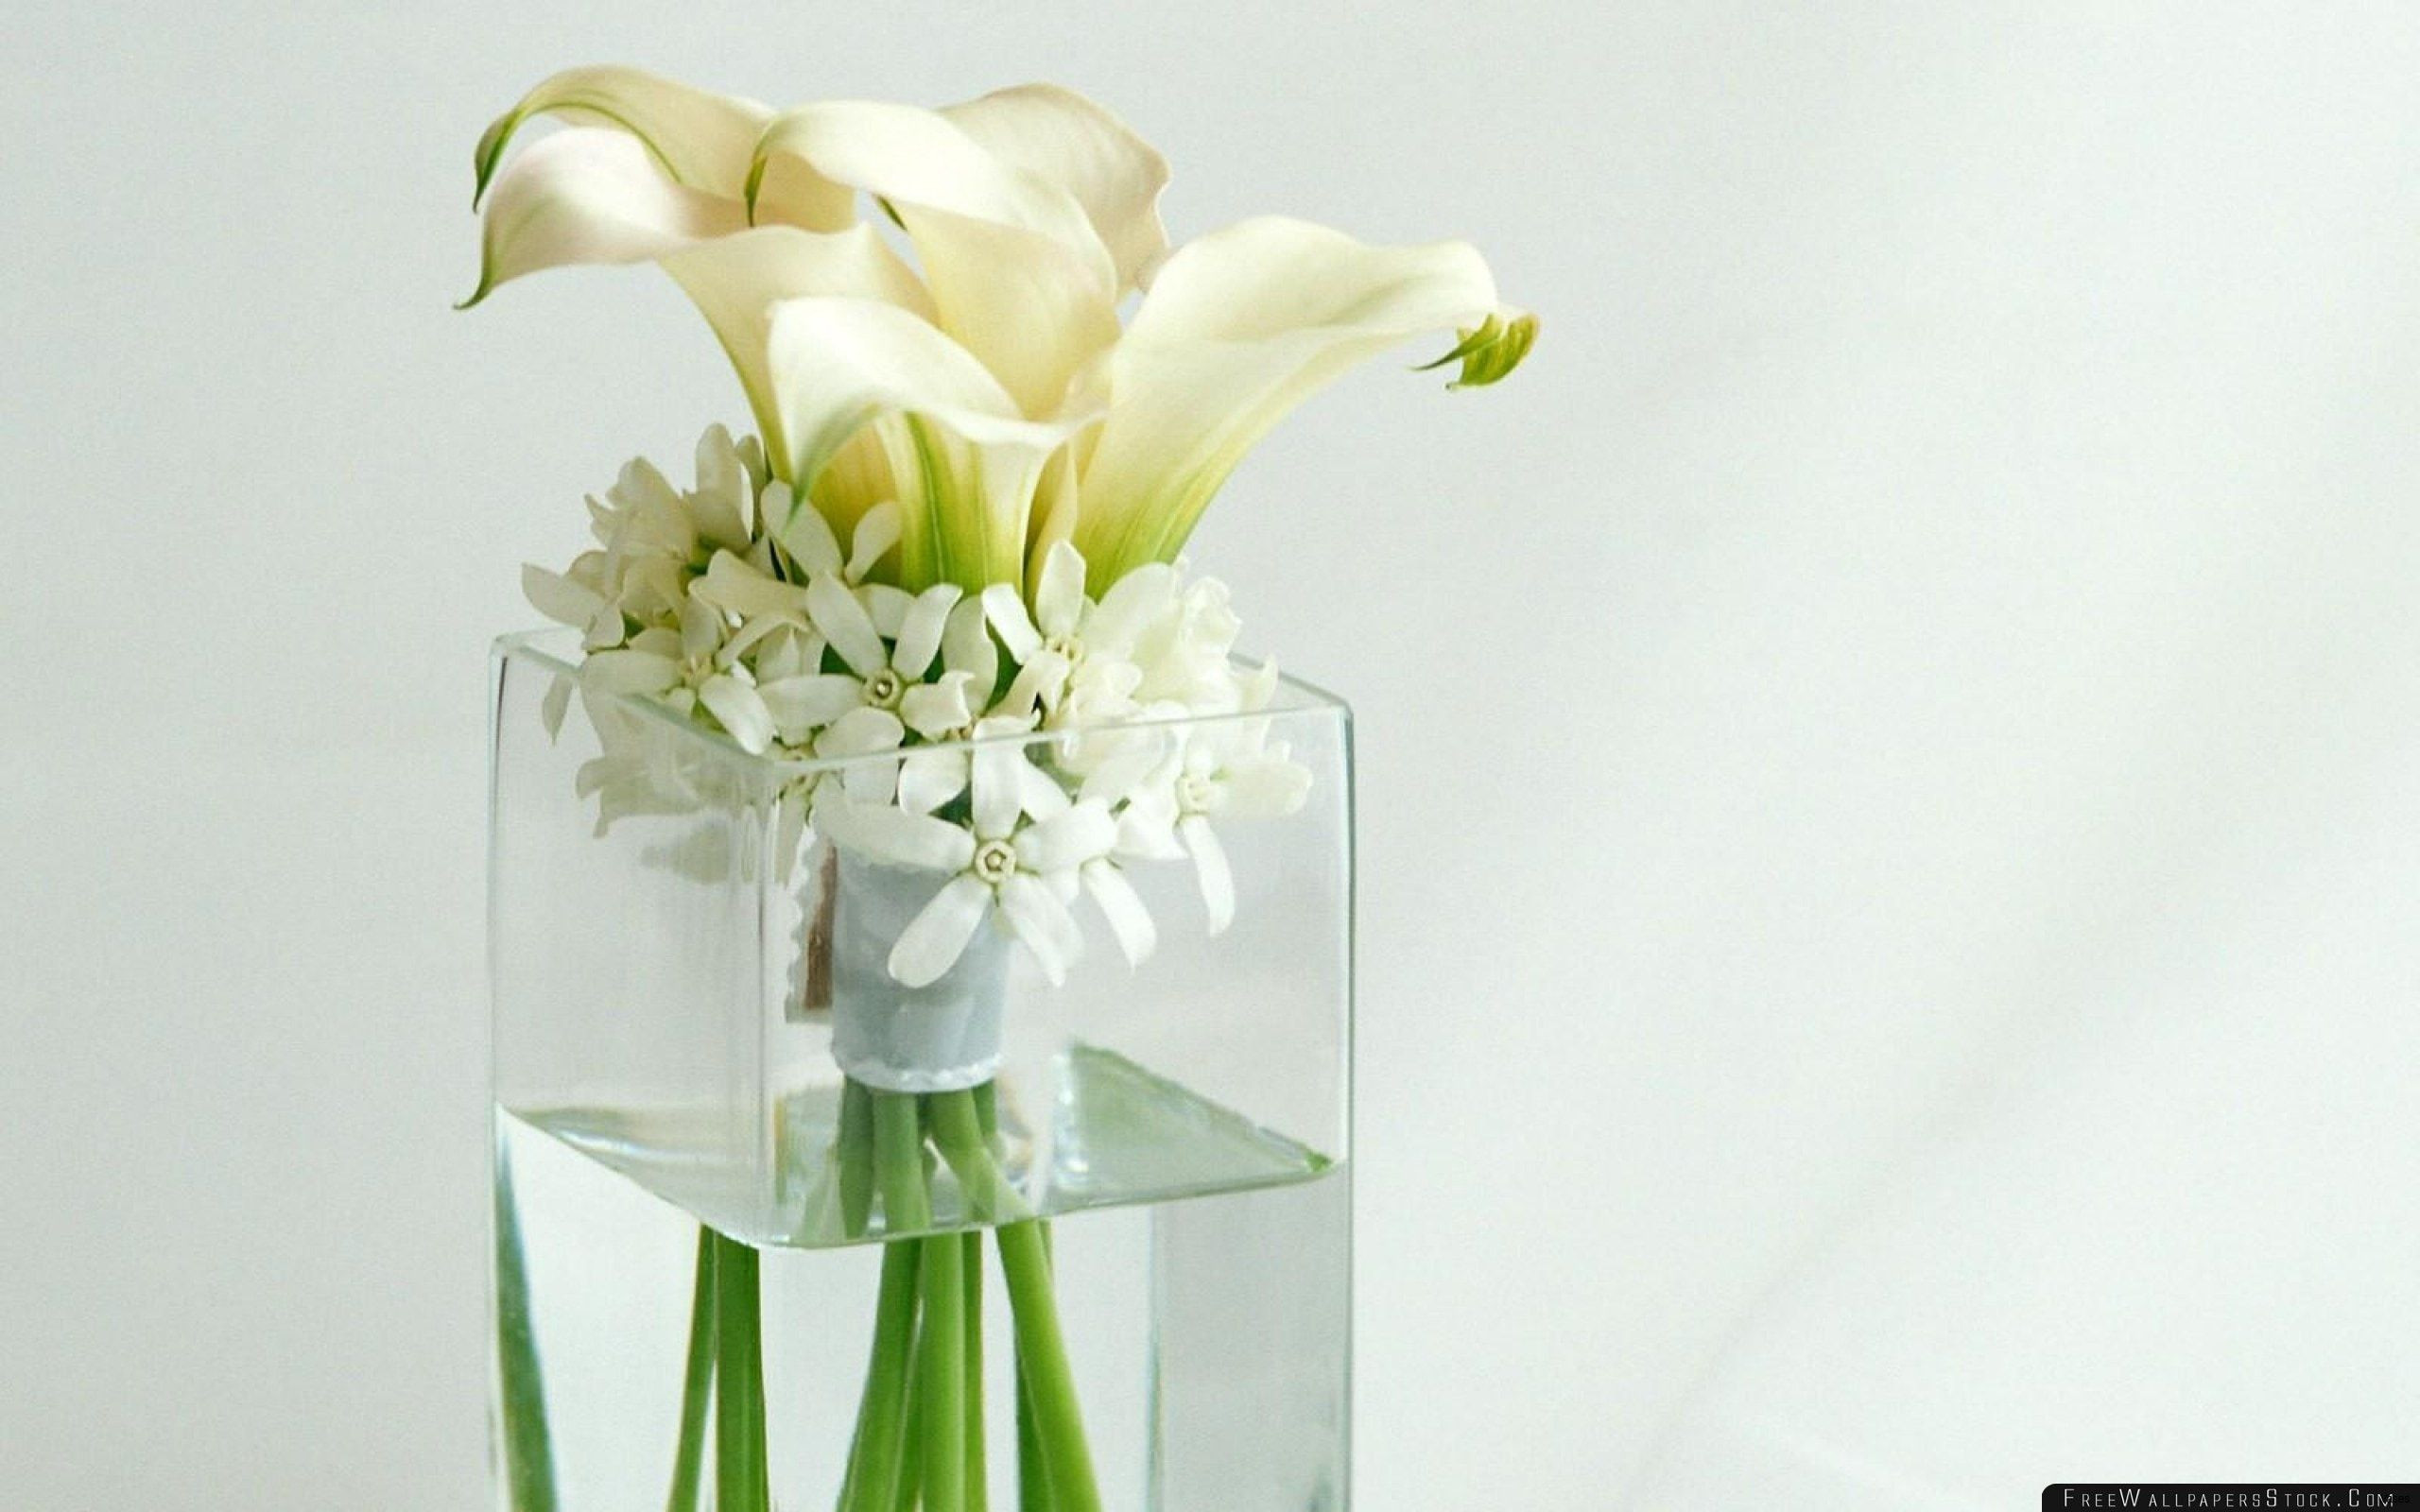 21 Recommended Glass Vase Centerpiece Ideas 2024 free download glass vase centerpiece ideas of flowers in glass vase new tall vase centerpiece ideas vases flowers within flowers in glass vase new tall vase centerpiece ideas vases flowers in water 0d art